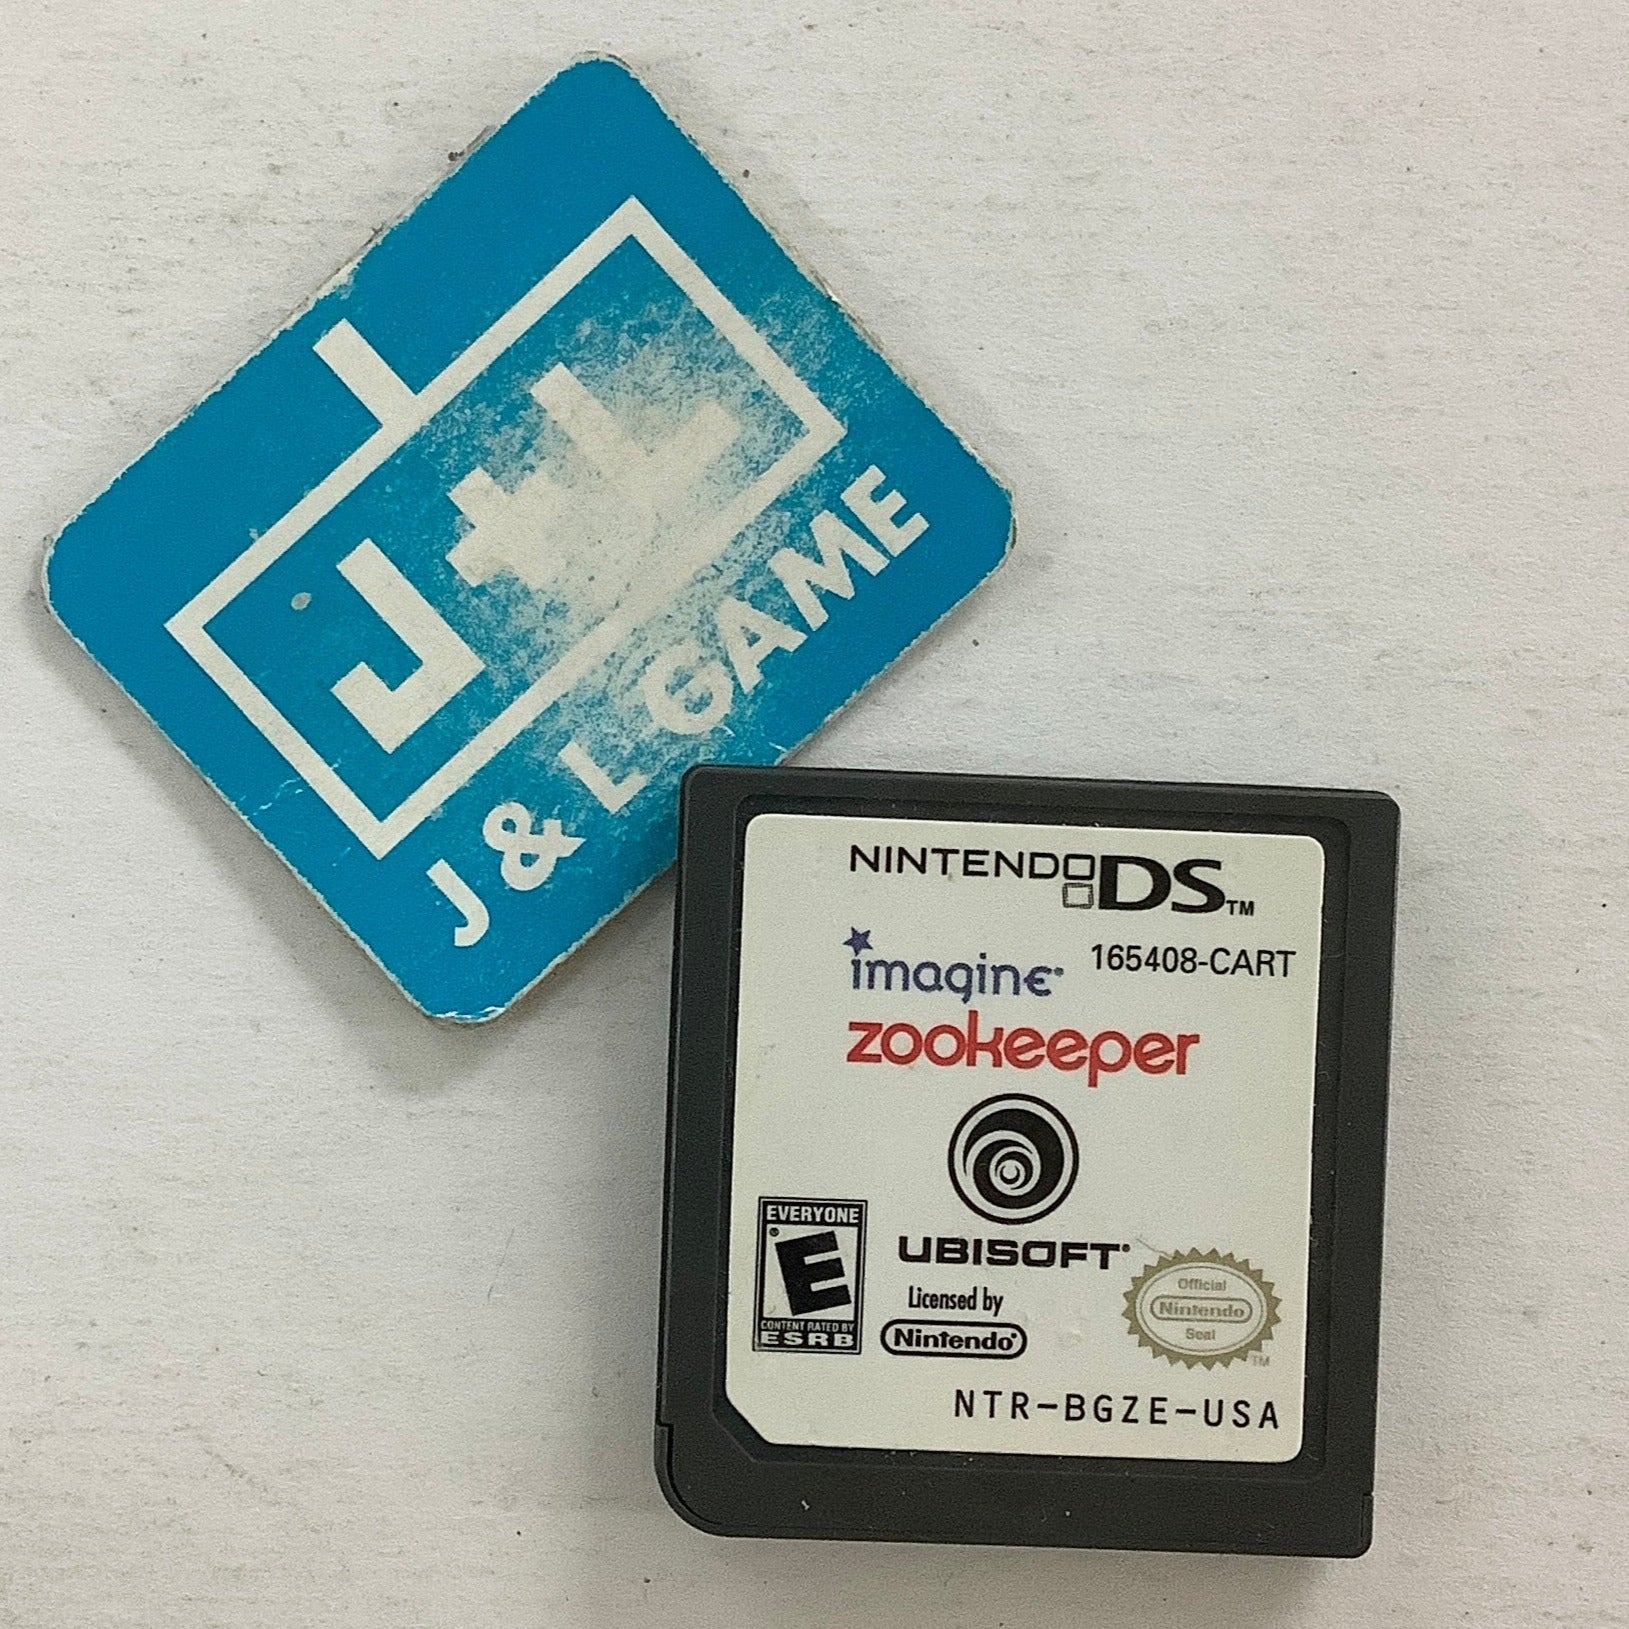 Imagine Zookeeper - (NDS) Nintendo DS [Pre-Owned] Video Games Ubisoft   